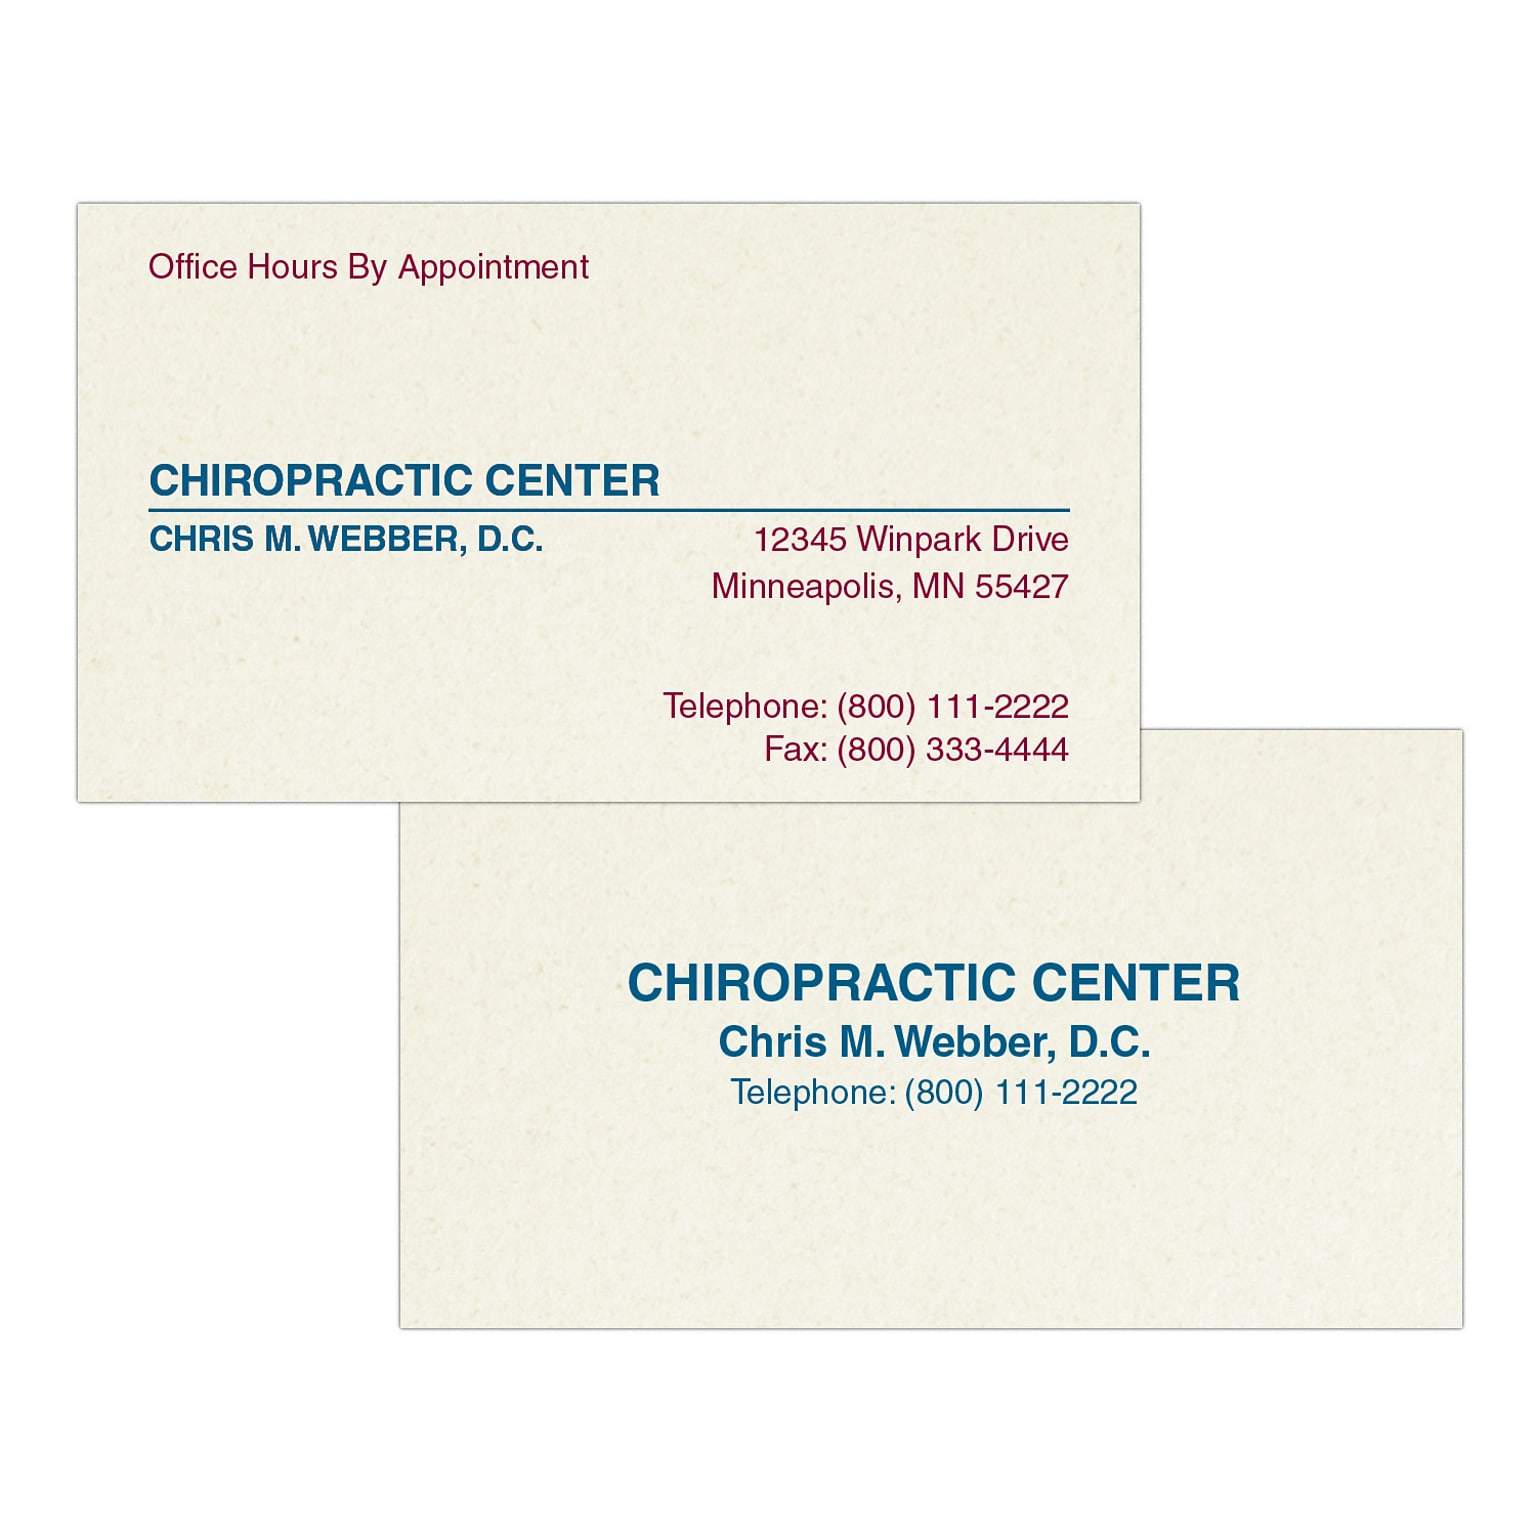 Custom 1-2 Color Appointment Cards, CLASSIC CREST® Smooth Millstone 80#, Flat Print, 2 Custom Inks, 2-Sided, 250/Pk